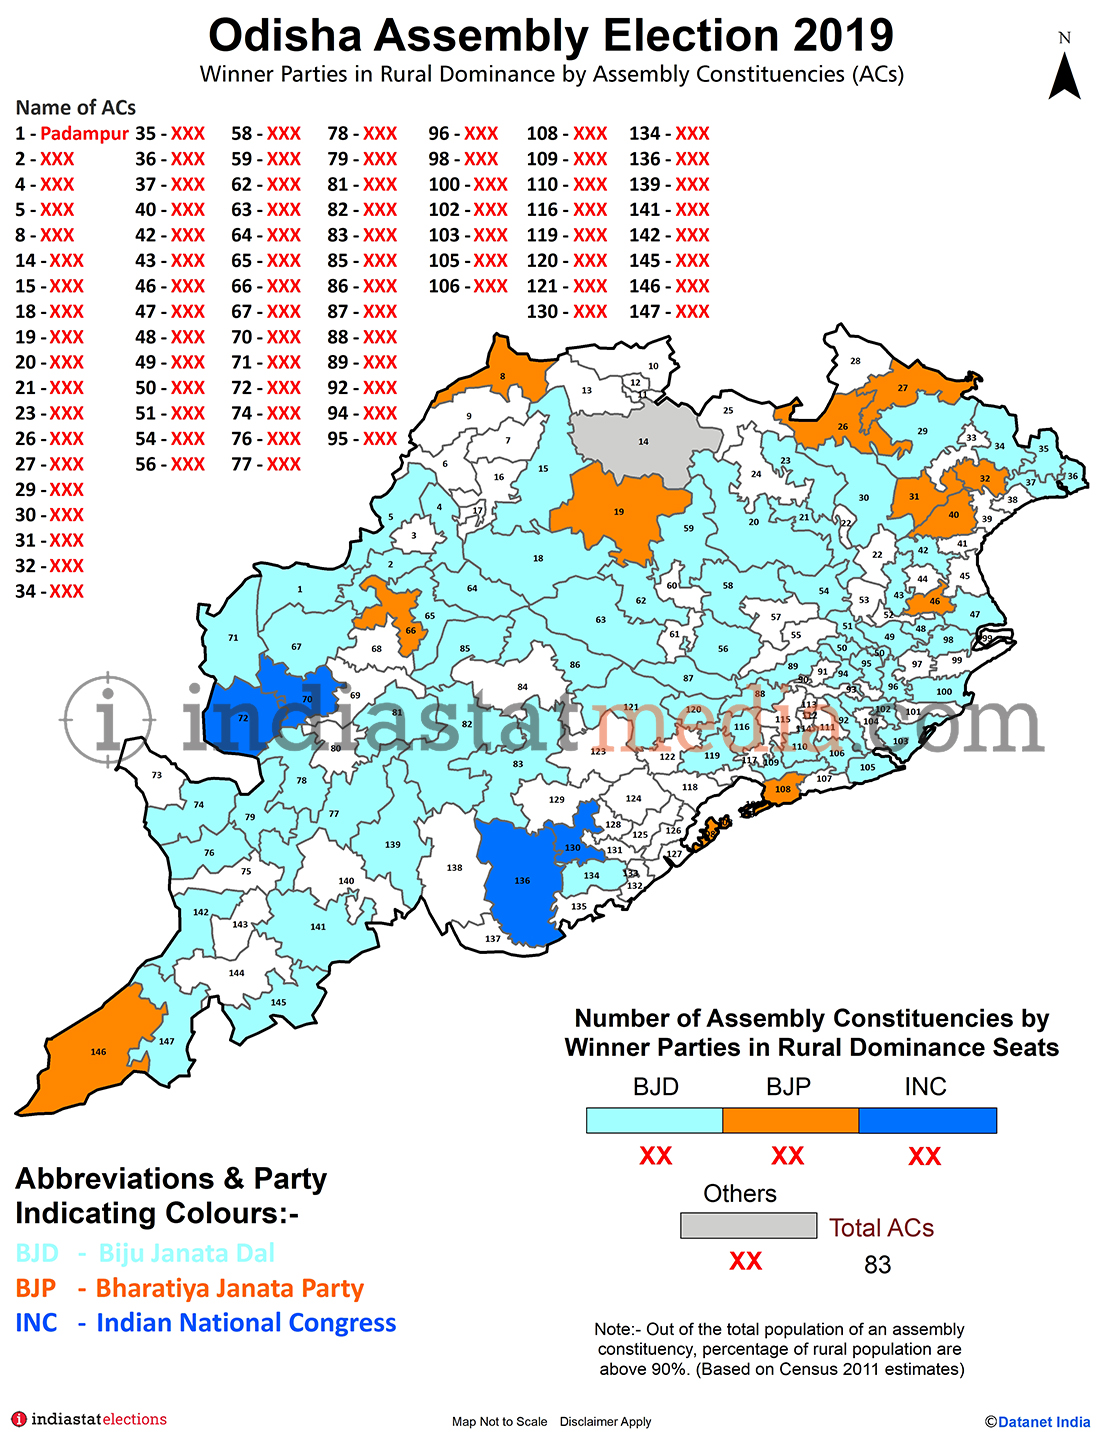 Winner Parties in Rural Dominance Constituencies in Odisha (Assembly Election - 2019)